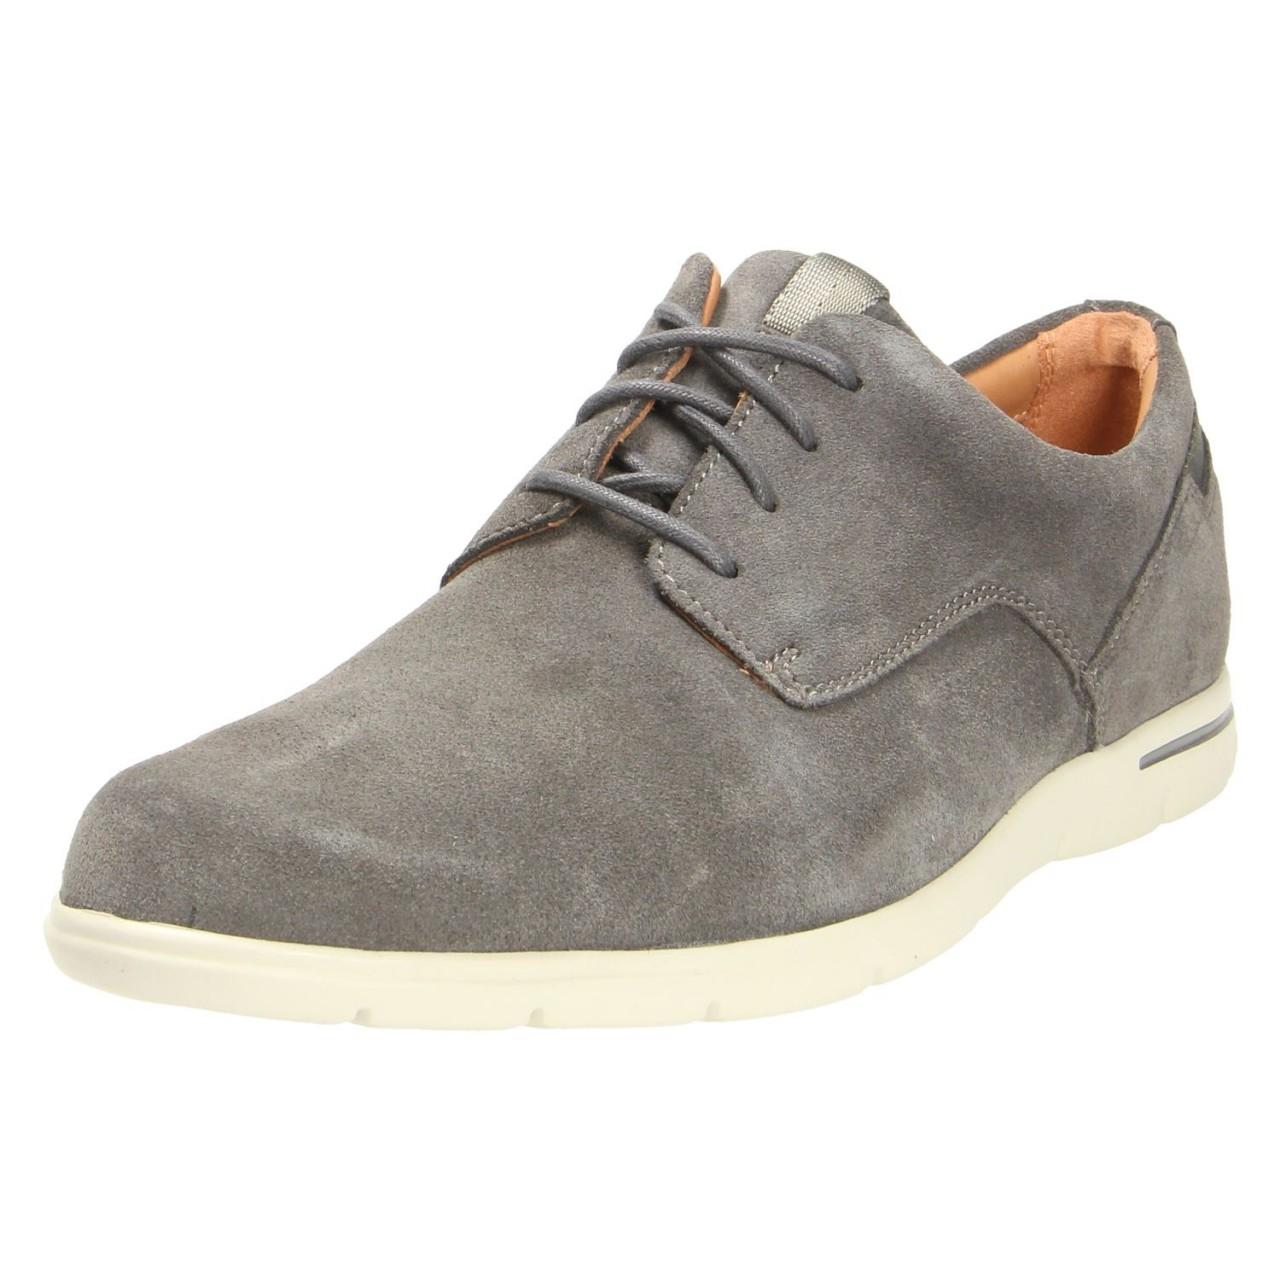 Clarks Comfort Lace-ups Grey 261317507 06 in Grey for Men - Lyst